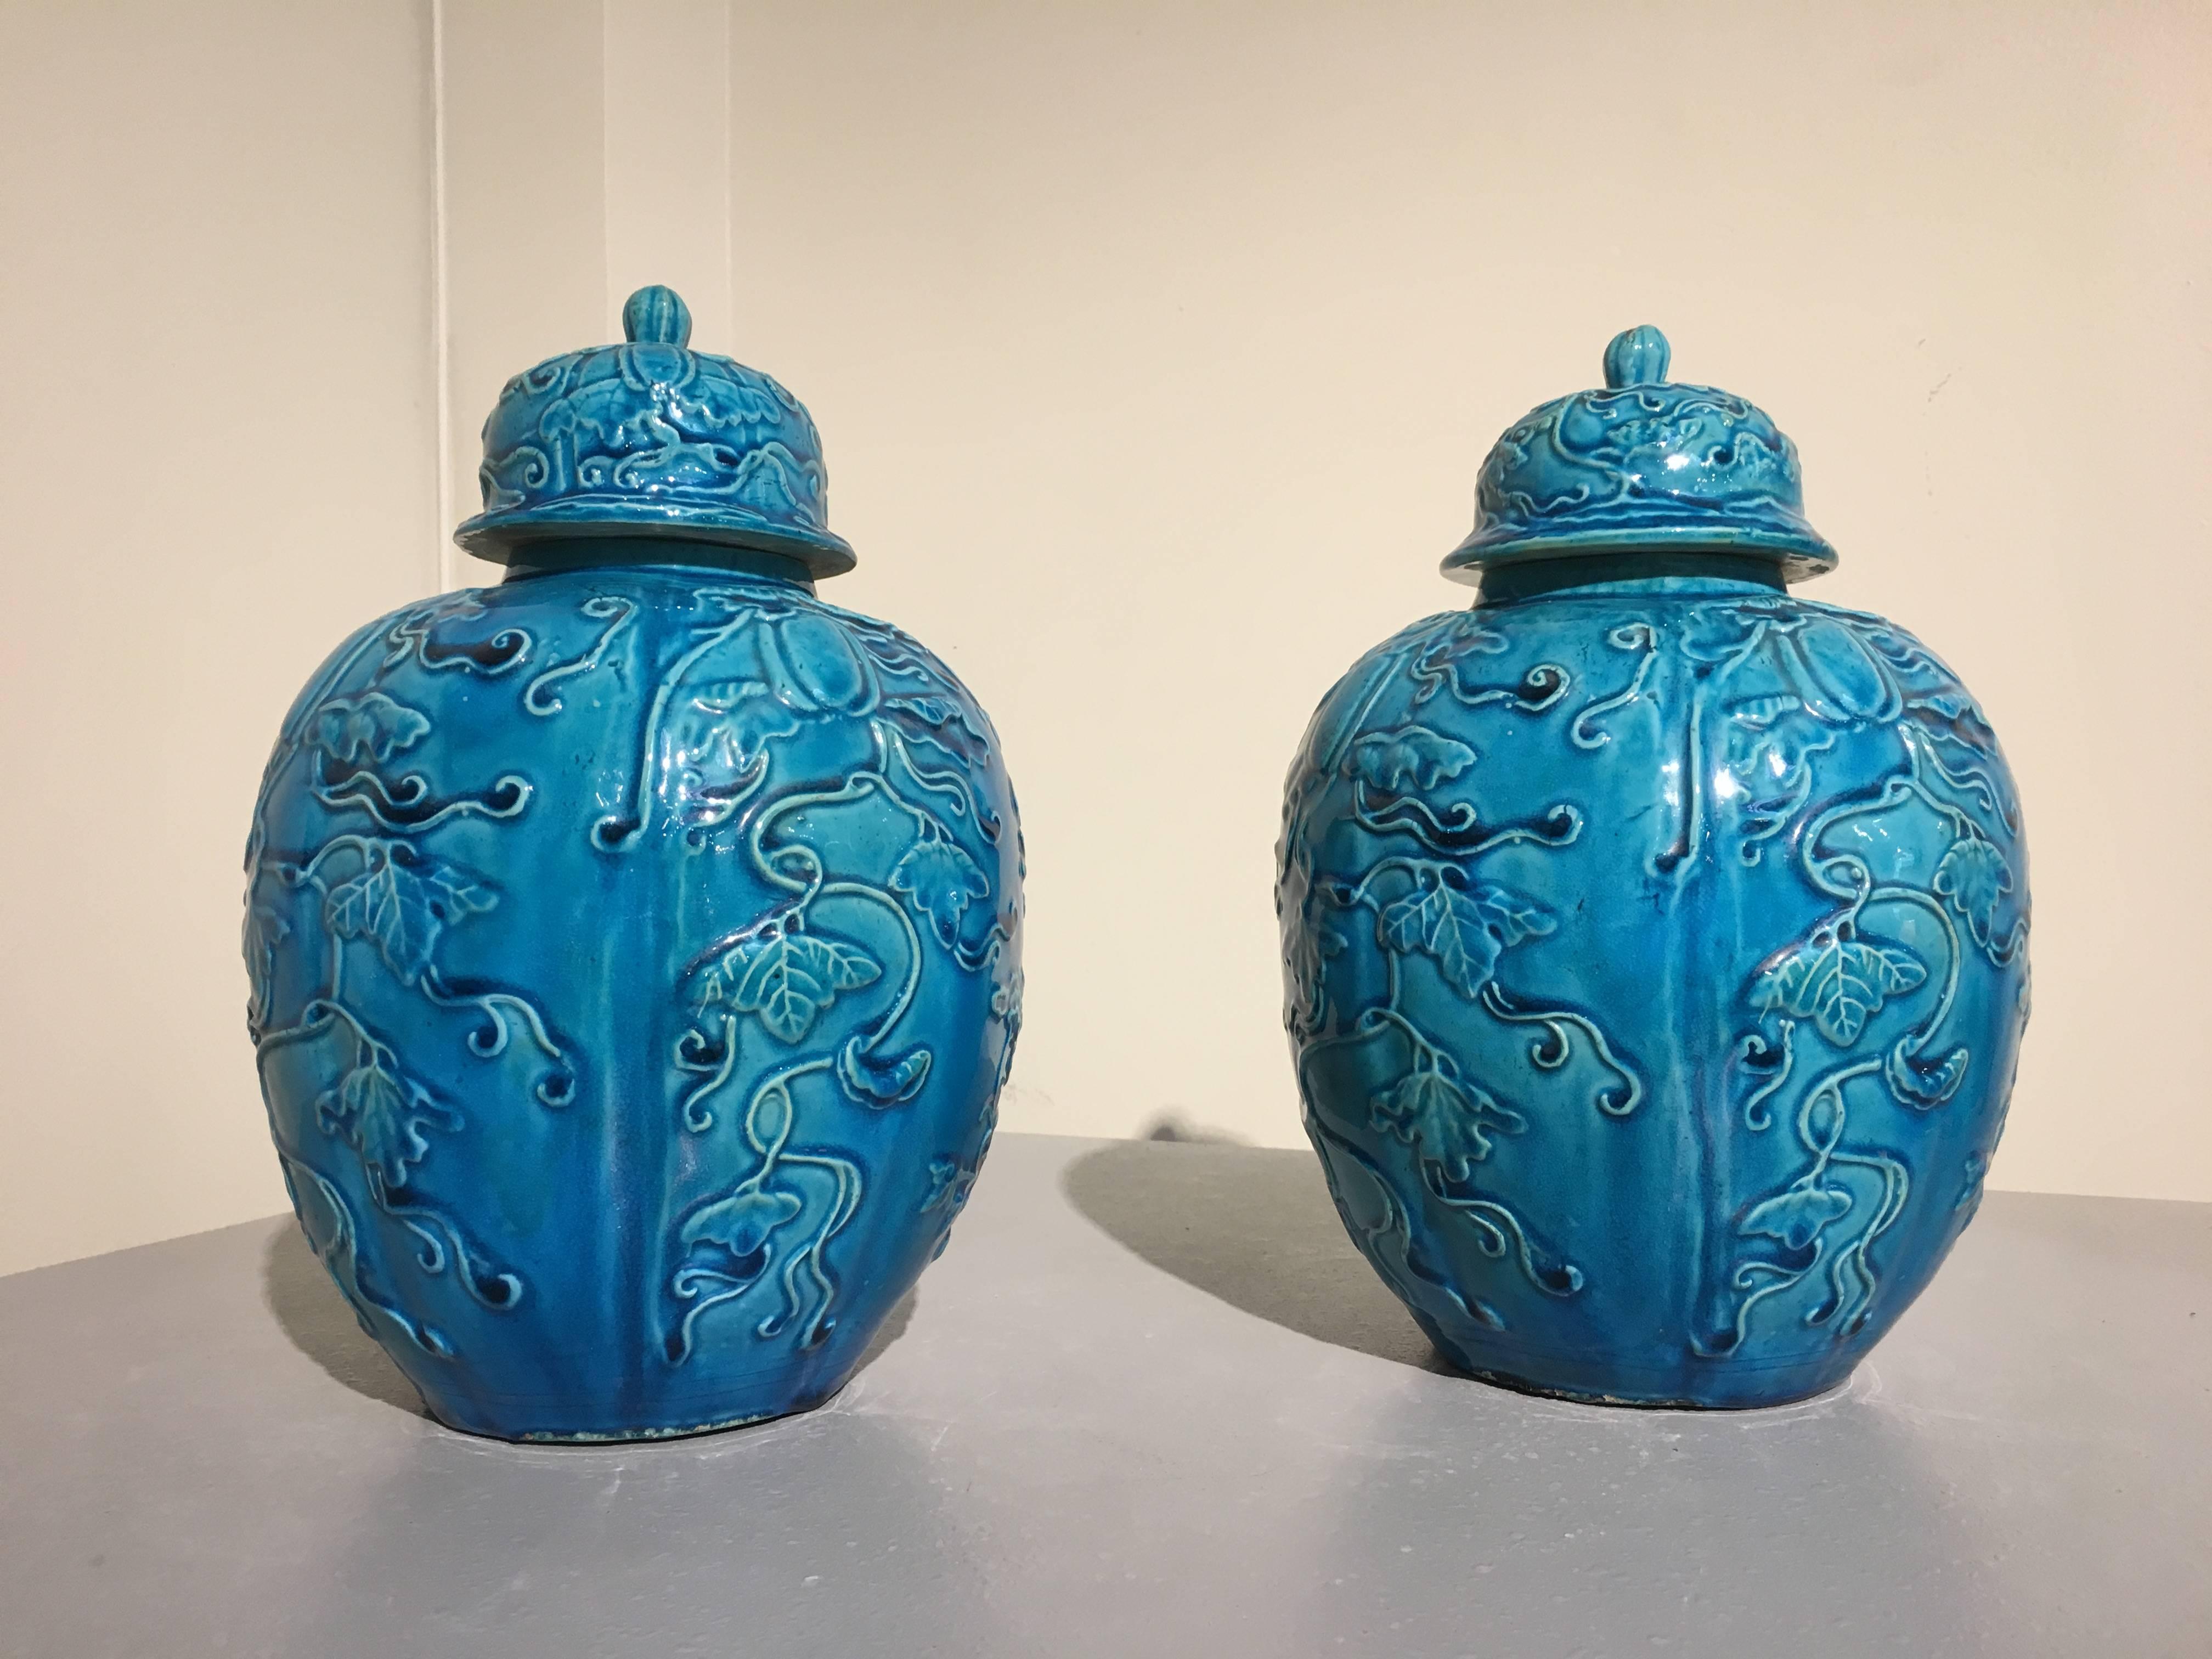 A stunning pair of Chinese Qing Dynasty turquoise glazed melon form lidded ginger jars with over molded decorations, late 19th or early 20th century, China.

The jars with lobed, globular bodies, decorated in over molded relief with a central spray